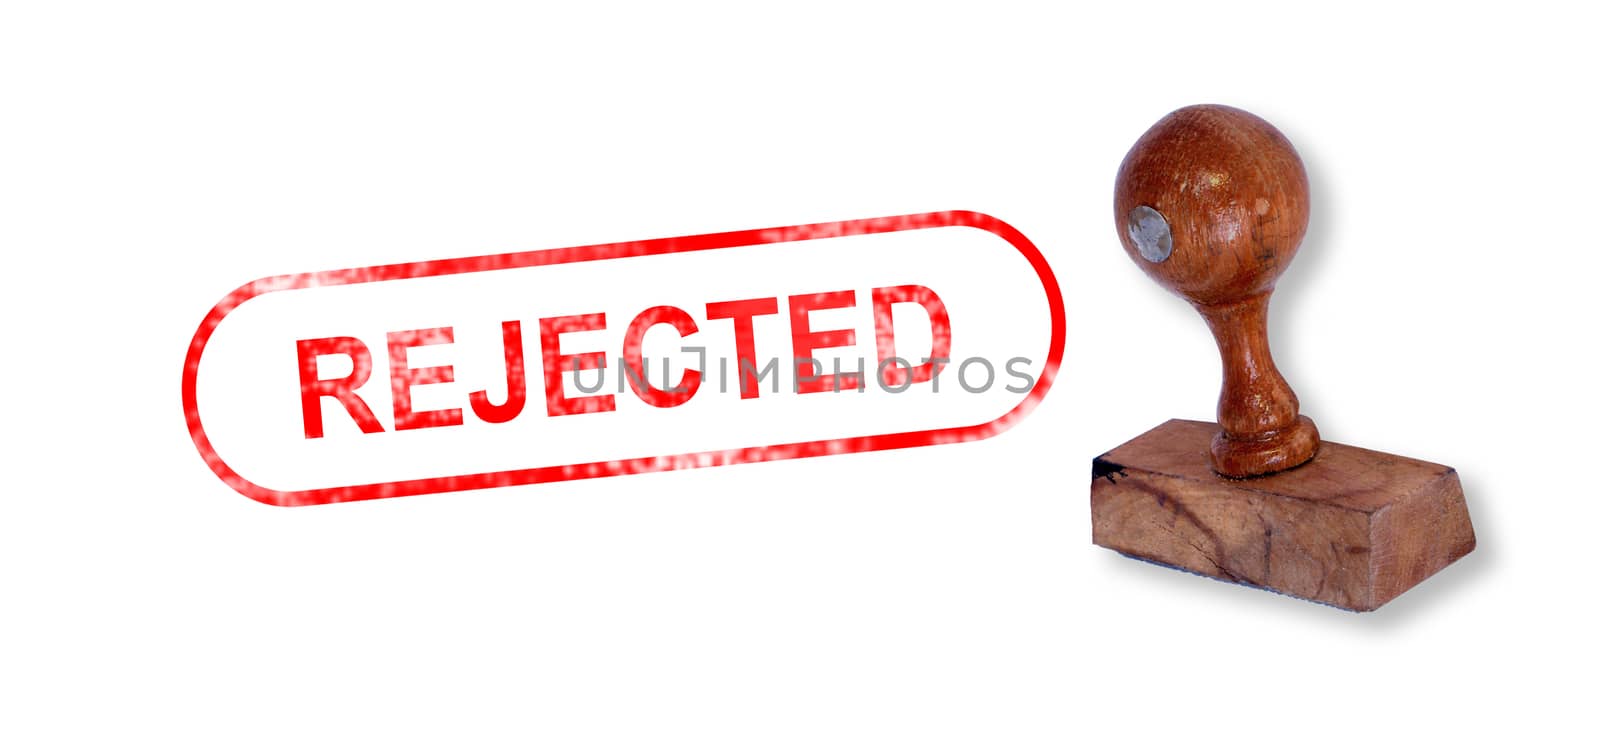 Top view of a rubber stamp with a giant word "REJECTED" printed, isolated on white background.